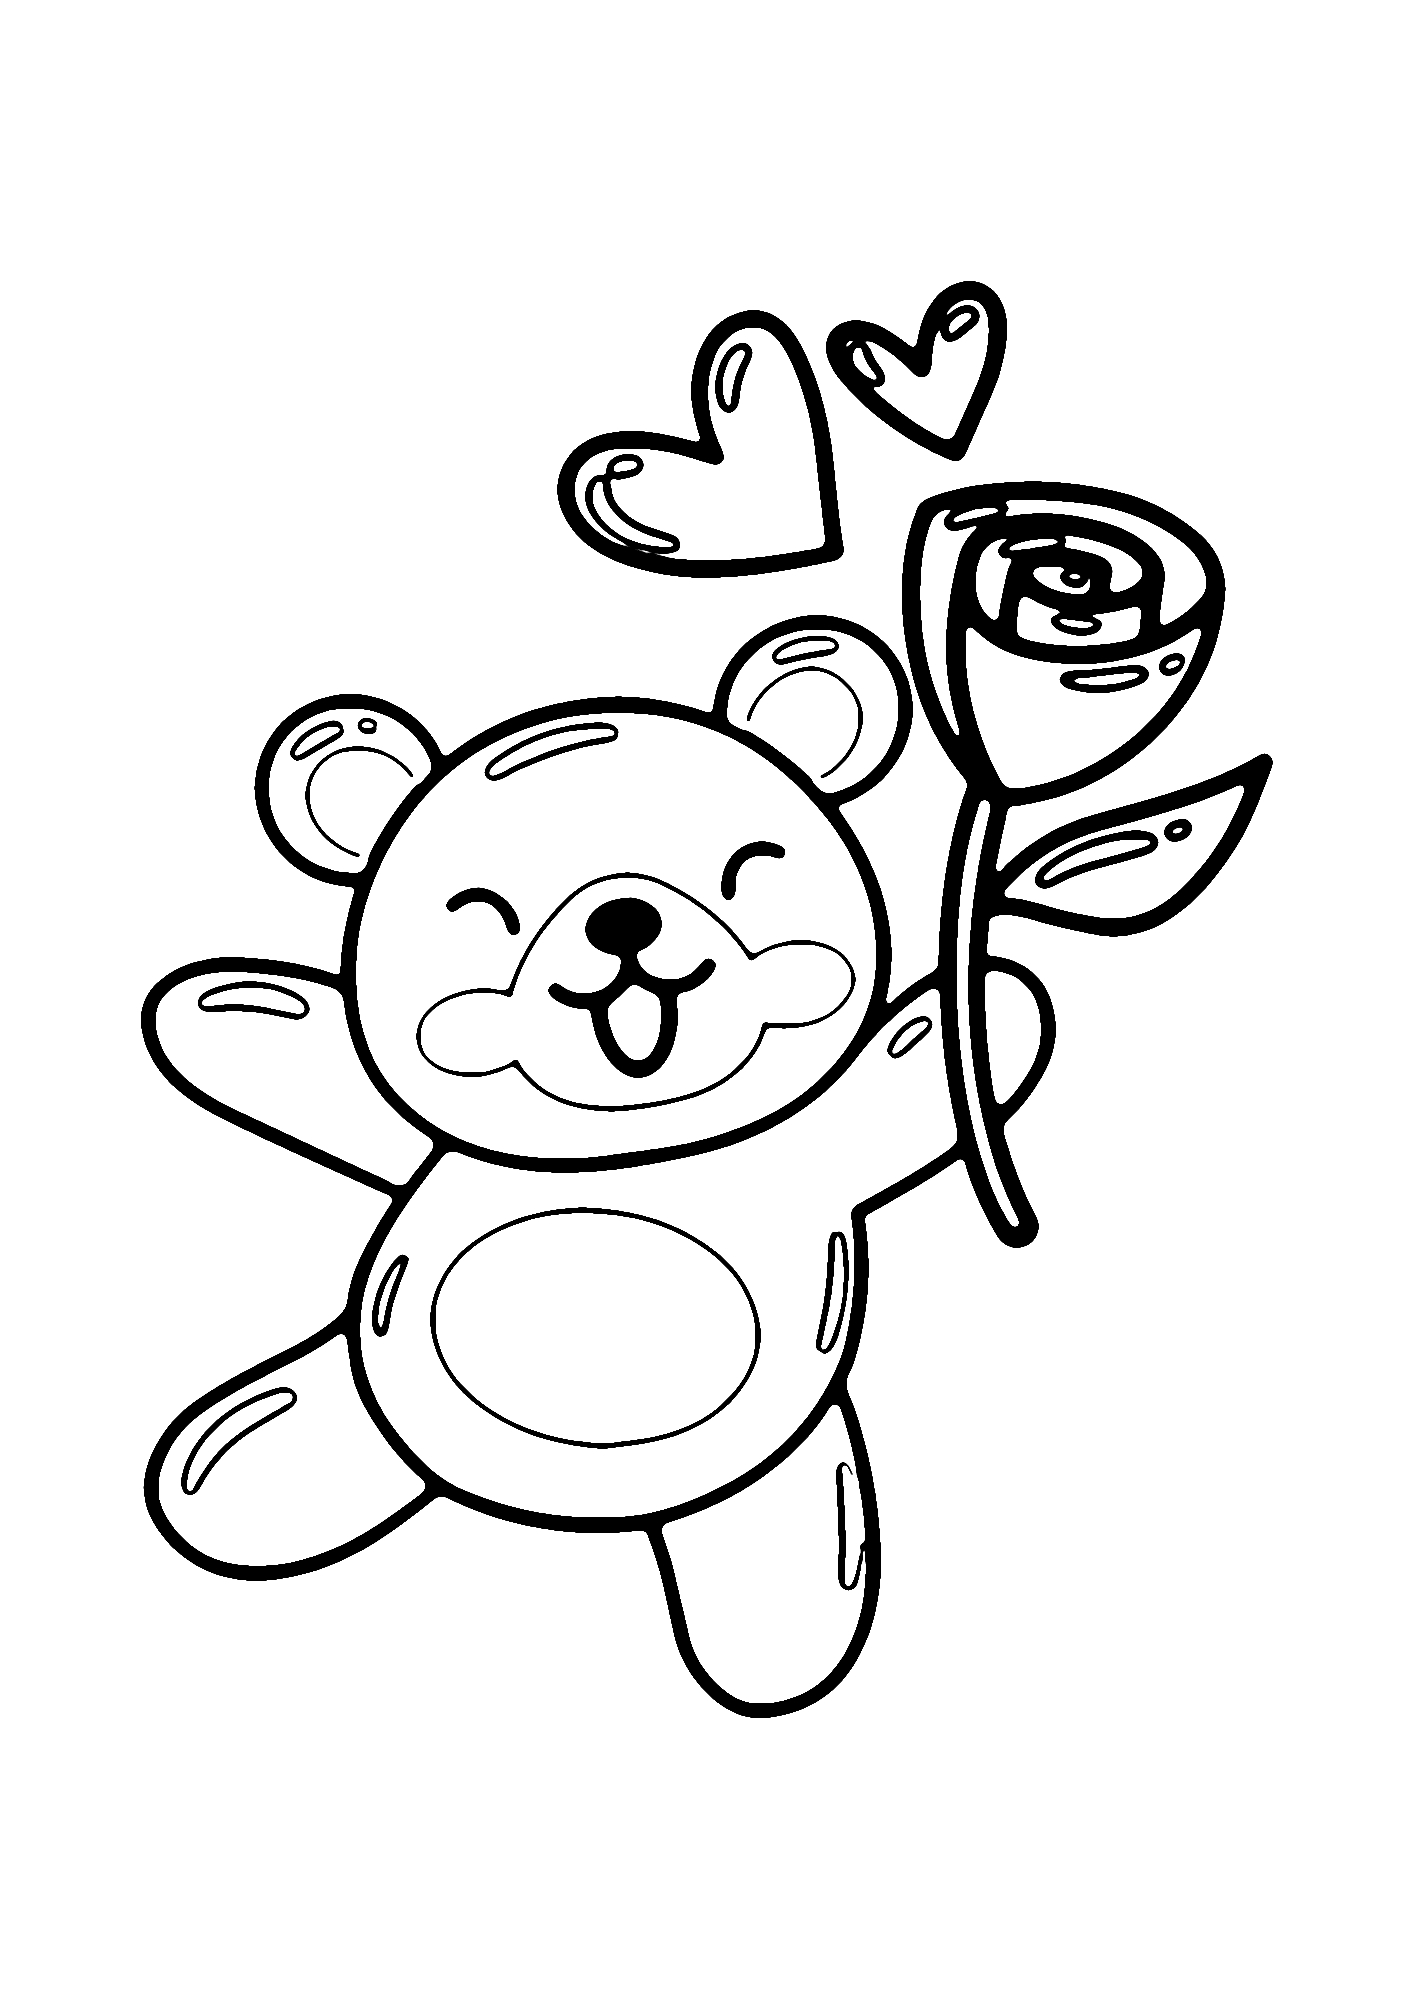 Valentine’s Day Free Printable Coloring Page